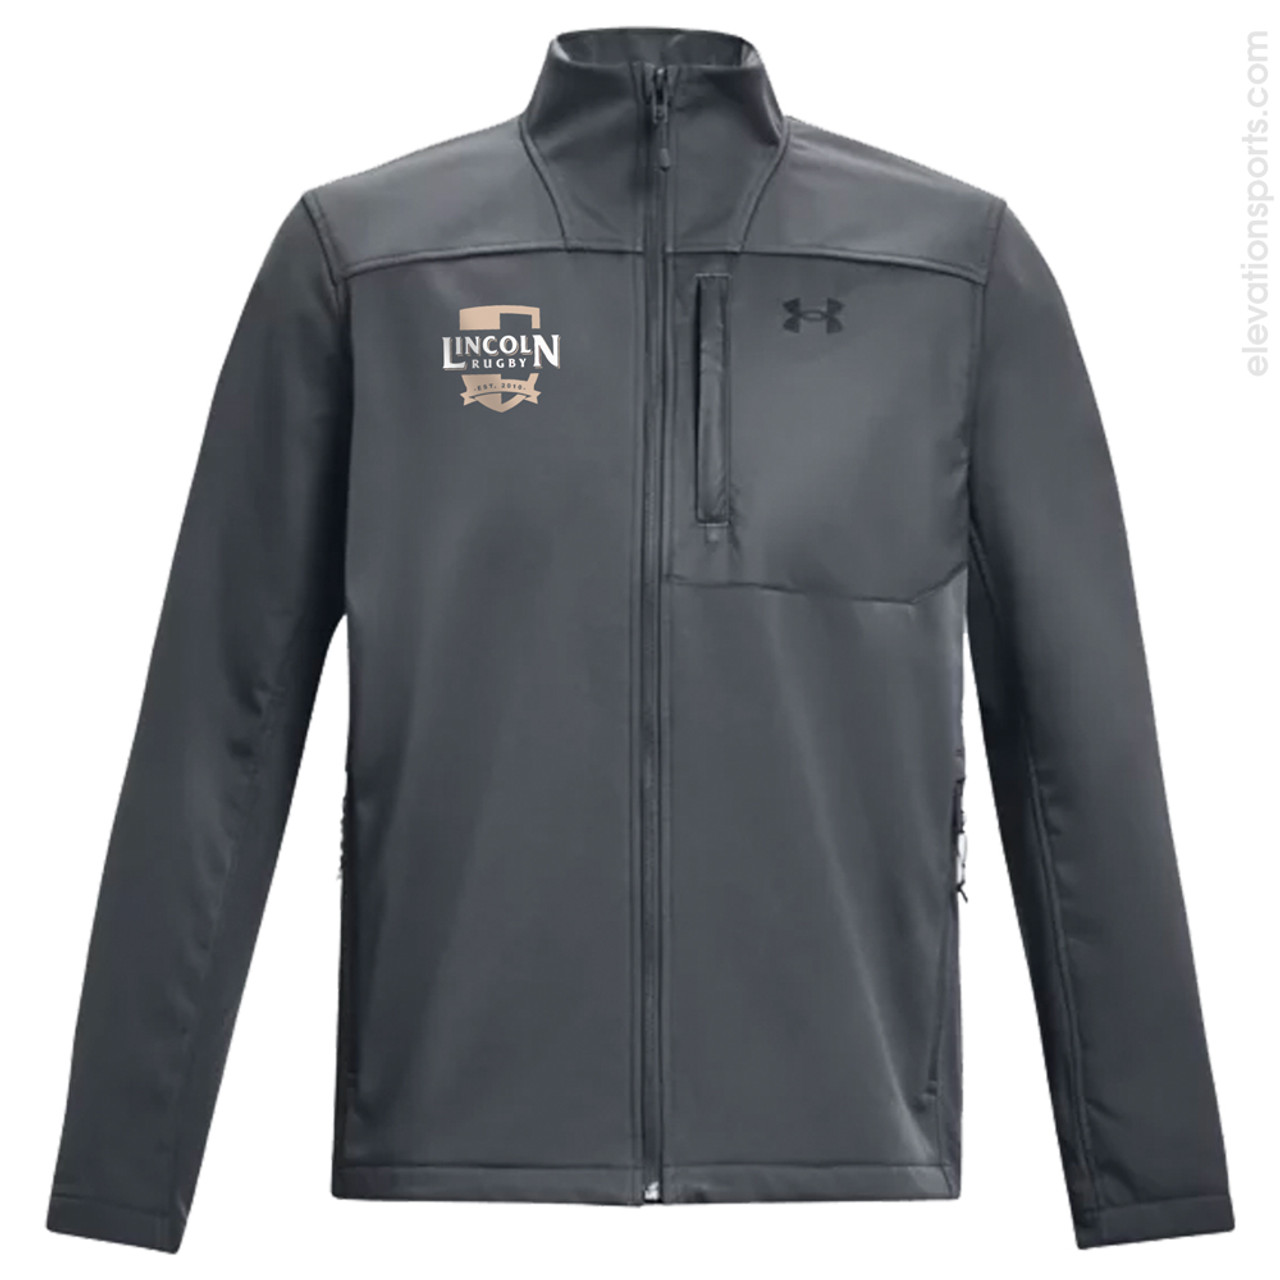 Under Armour ColdGear Infrared Shield 2.0 Jacket with Custom Embroidery, 1371586